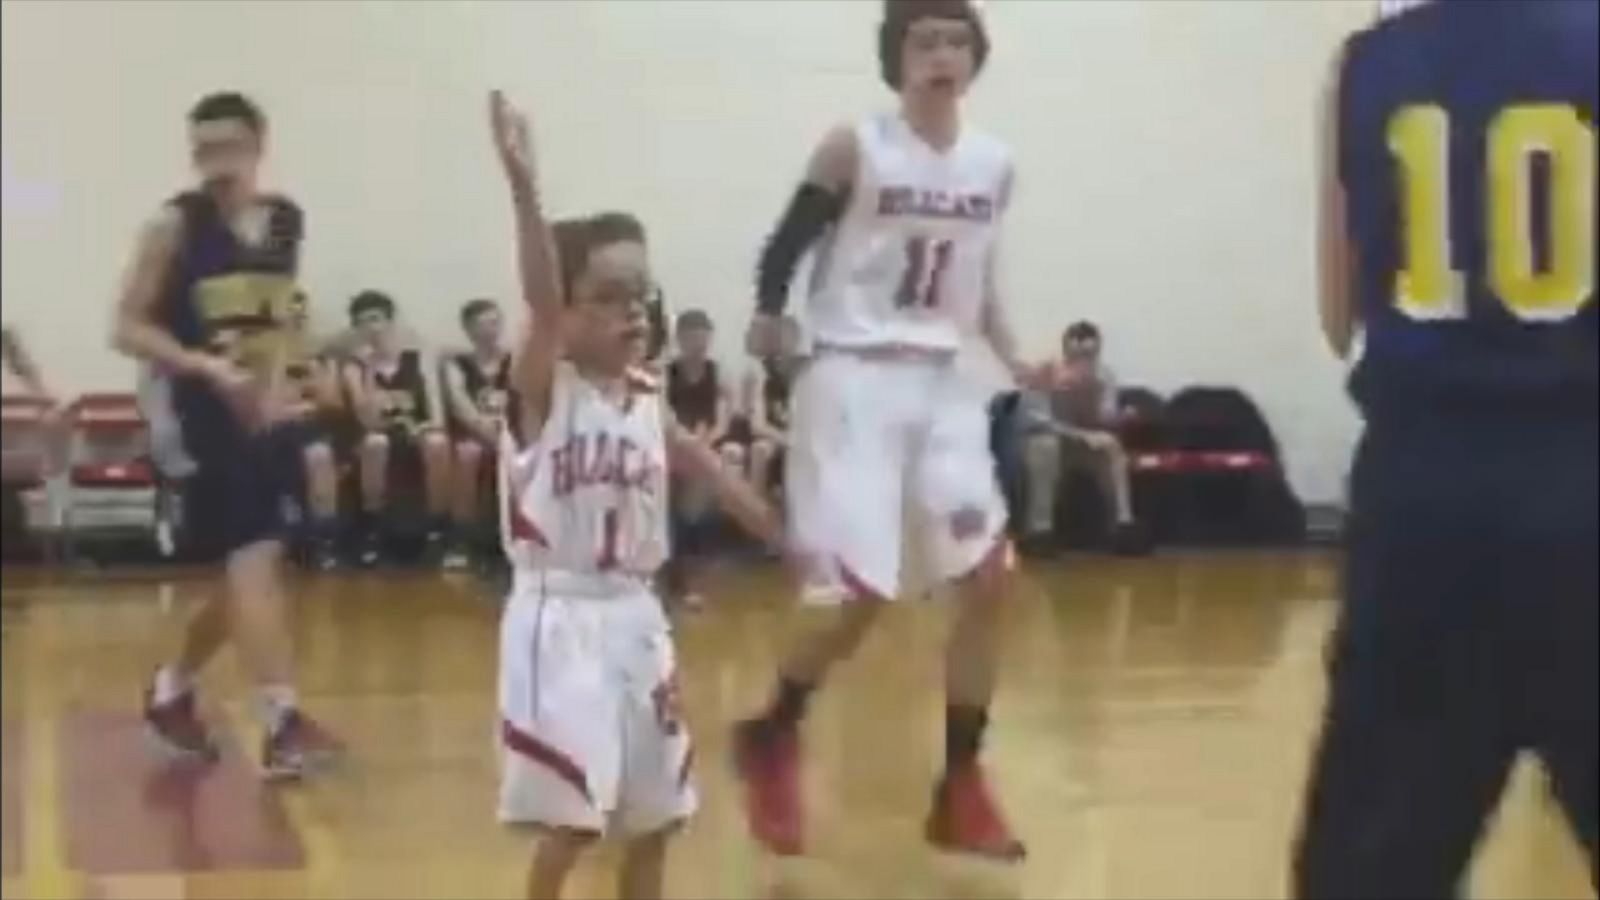 High School Basketball Team Welcomes 3-Foot-5-Inch Player - ABC News